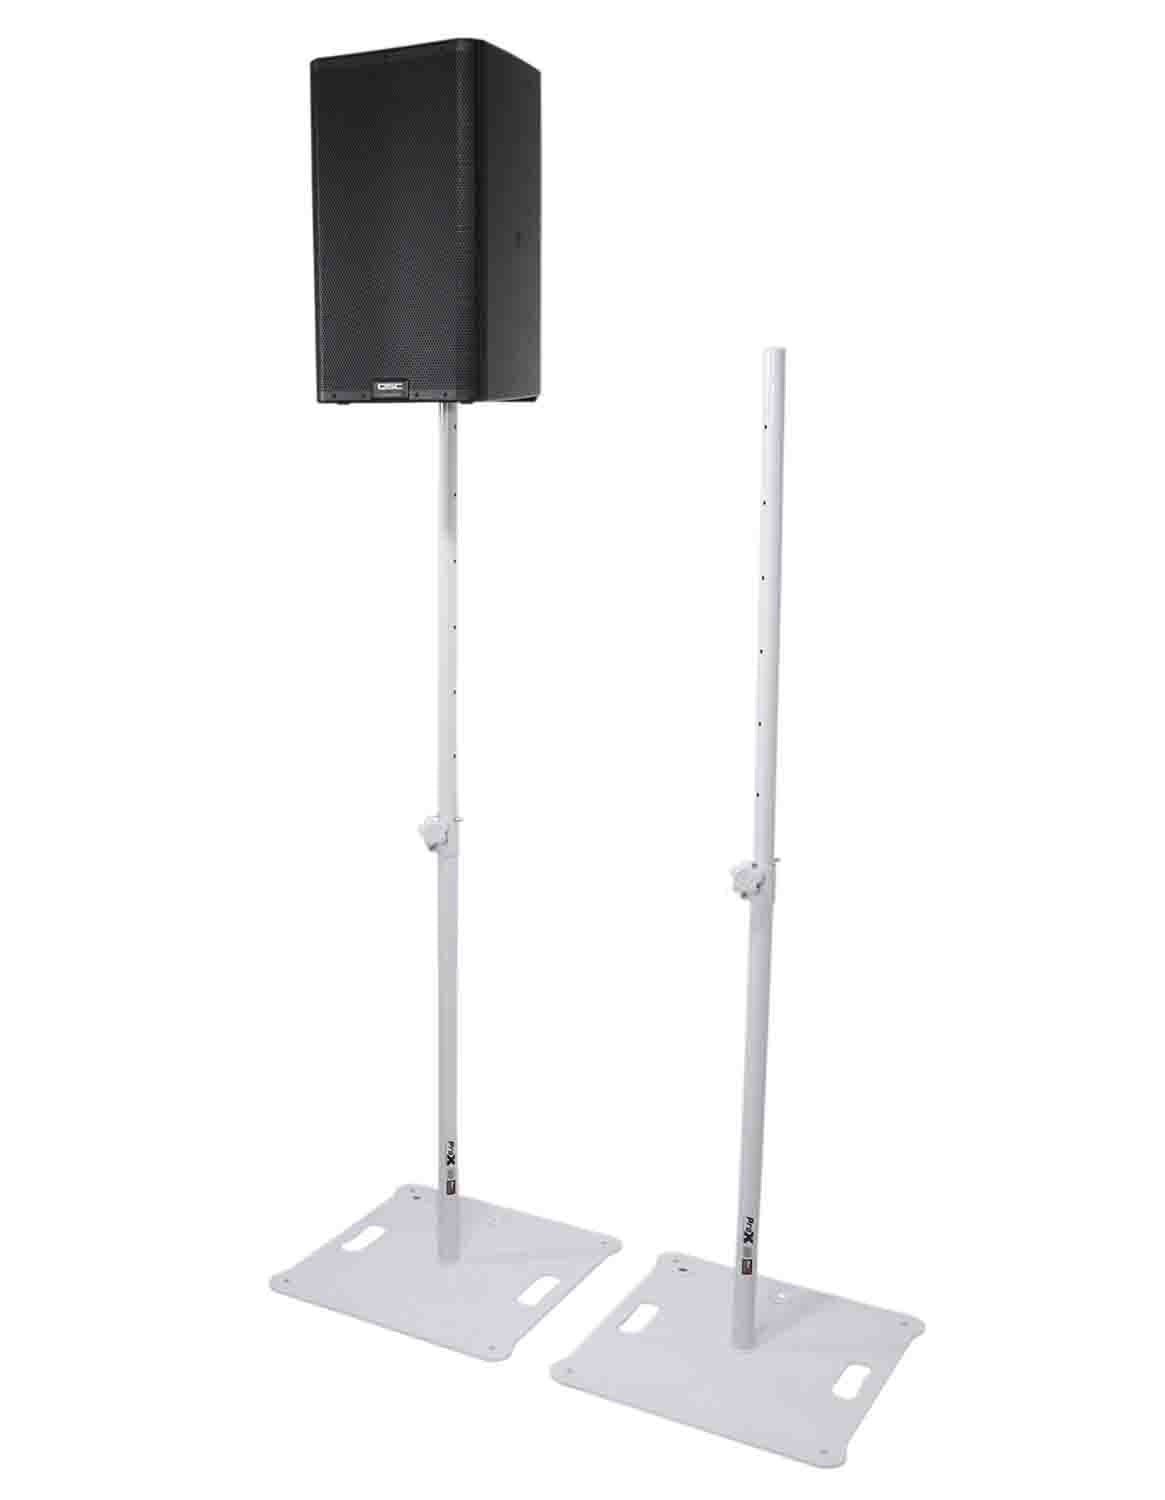 ProX X-POLARIS WH Portable Speaker and Lighting Dual Stand Kit with Base Plate and Carry Bags - White Finish - Hollywood DJ